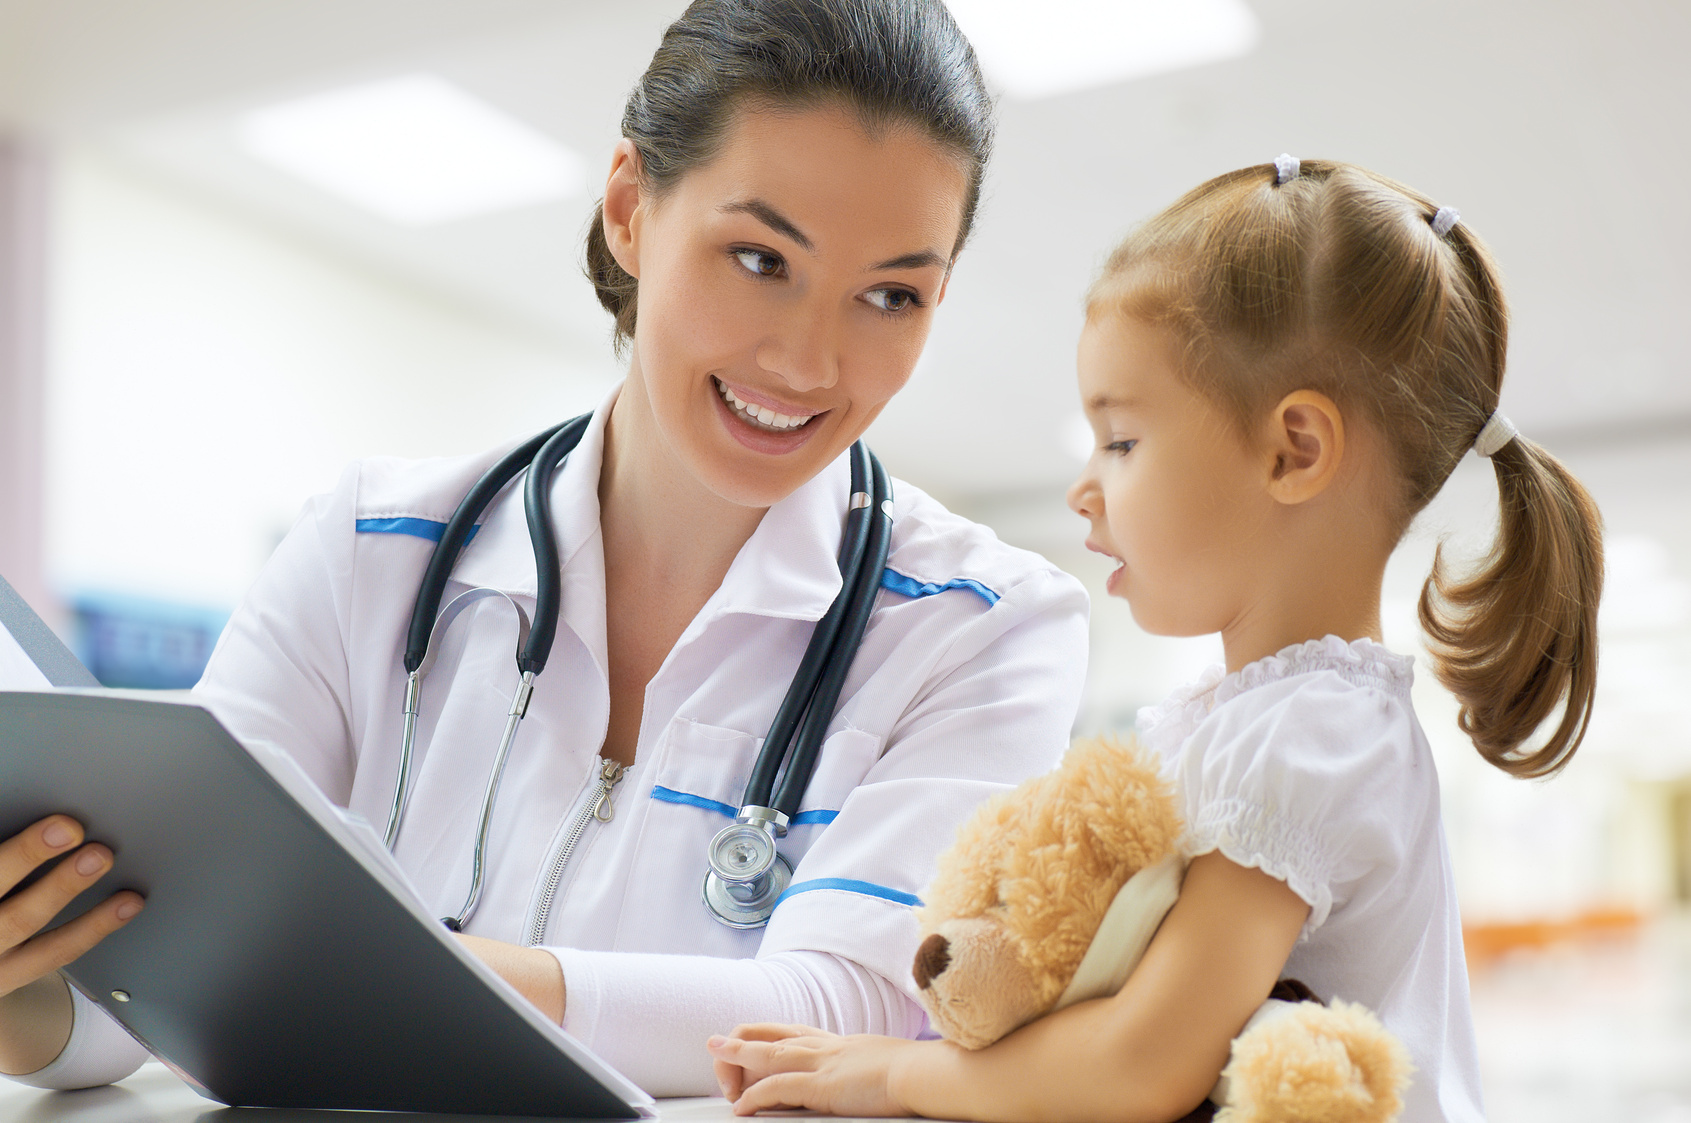 Top Features Of Pediatric Practice Management Software